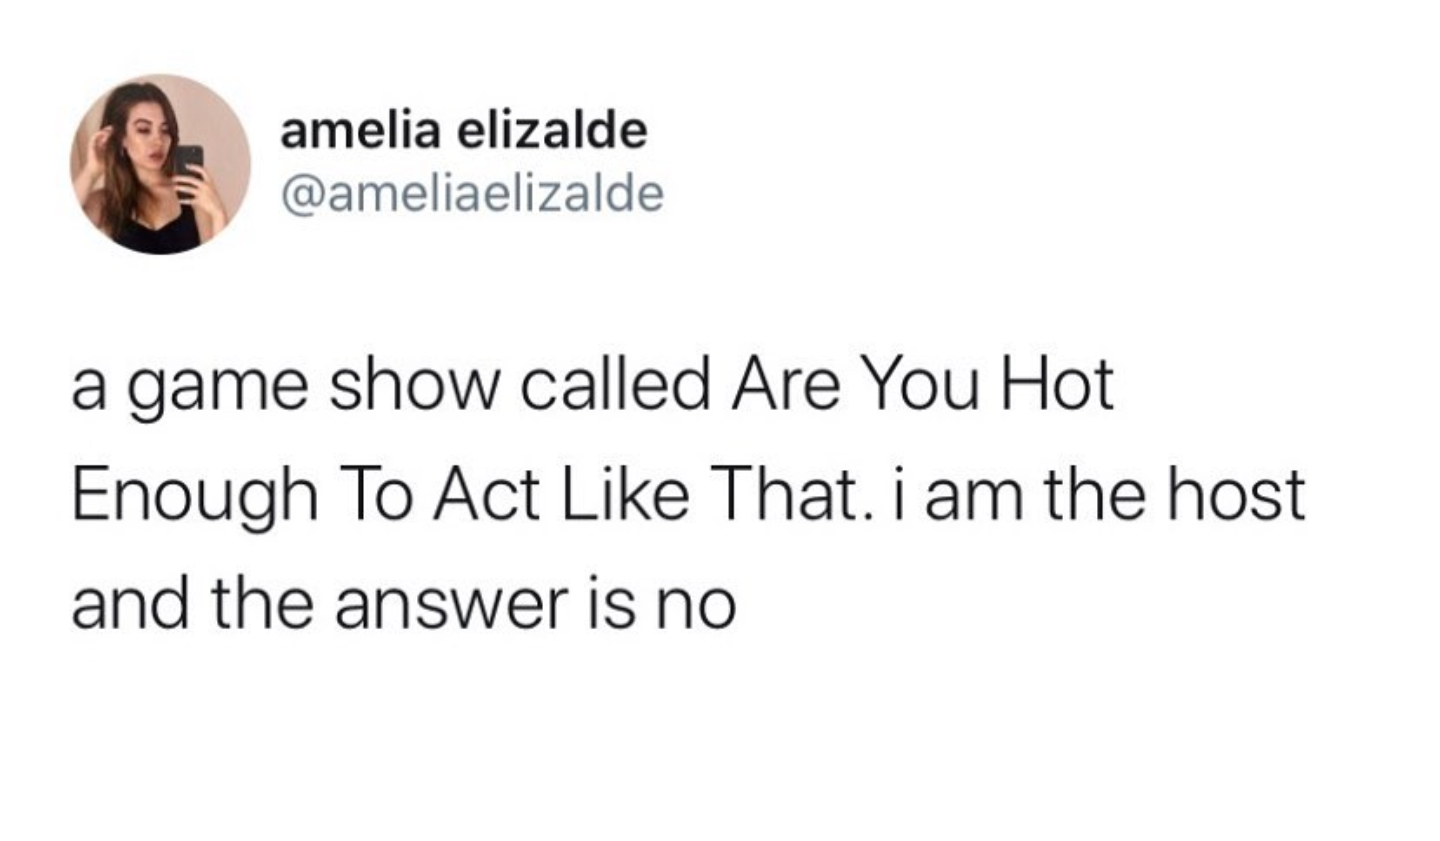 do you ever get pre annoyed - amelia elizalde a game show called Are You Hot Enough To Act That. i am the host and the answer is no